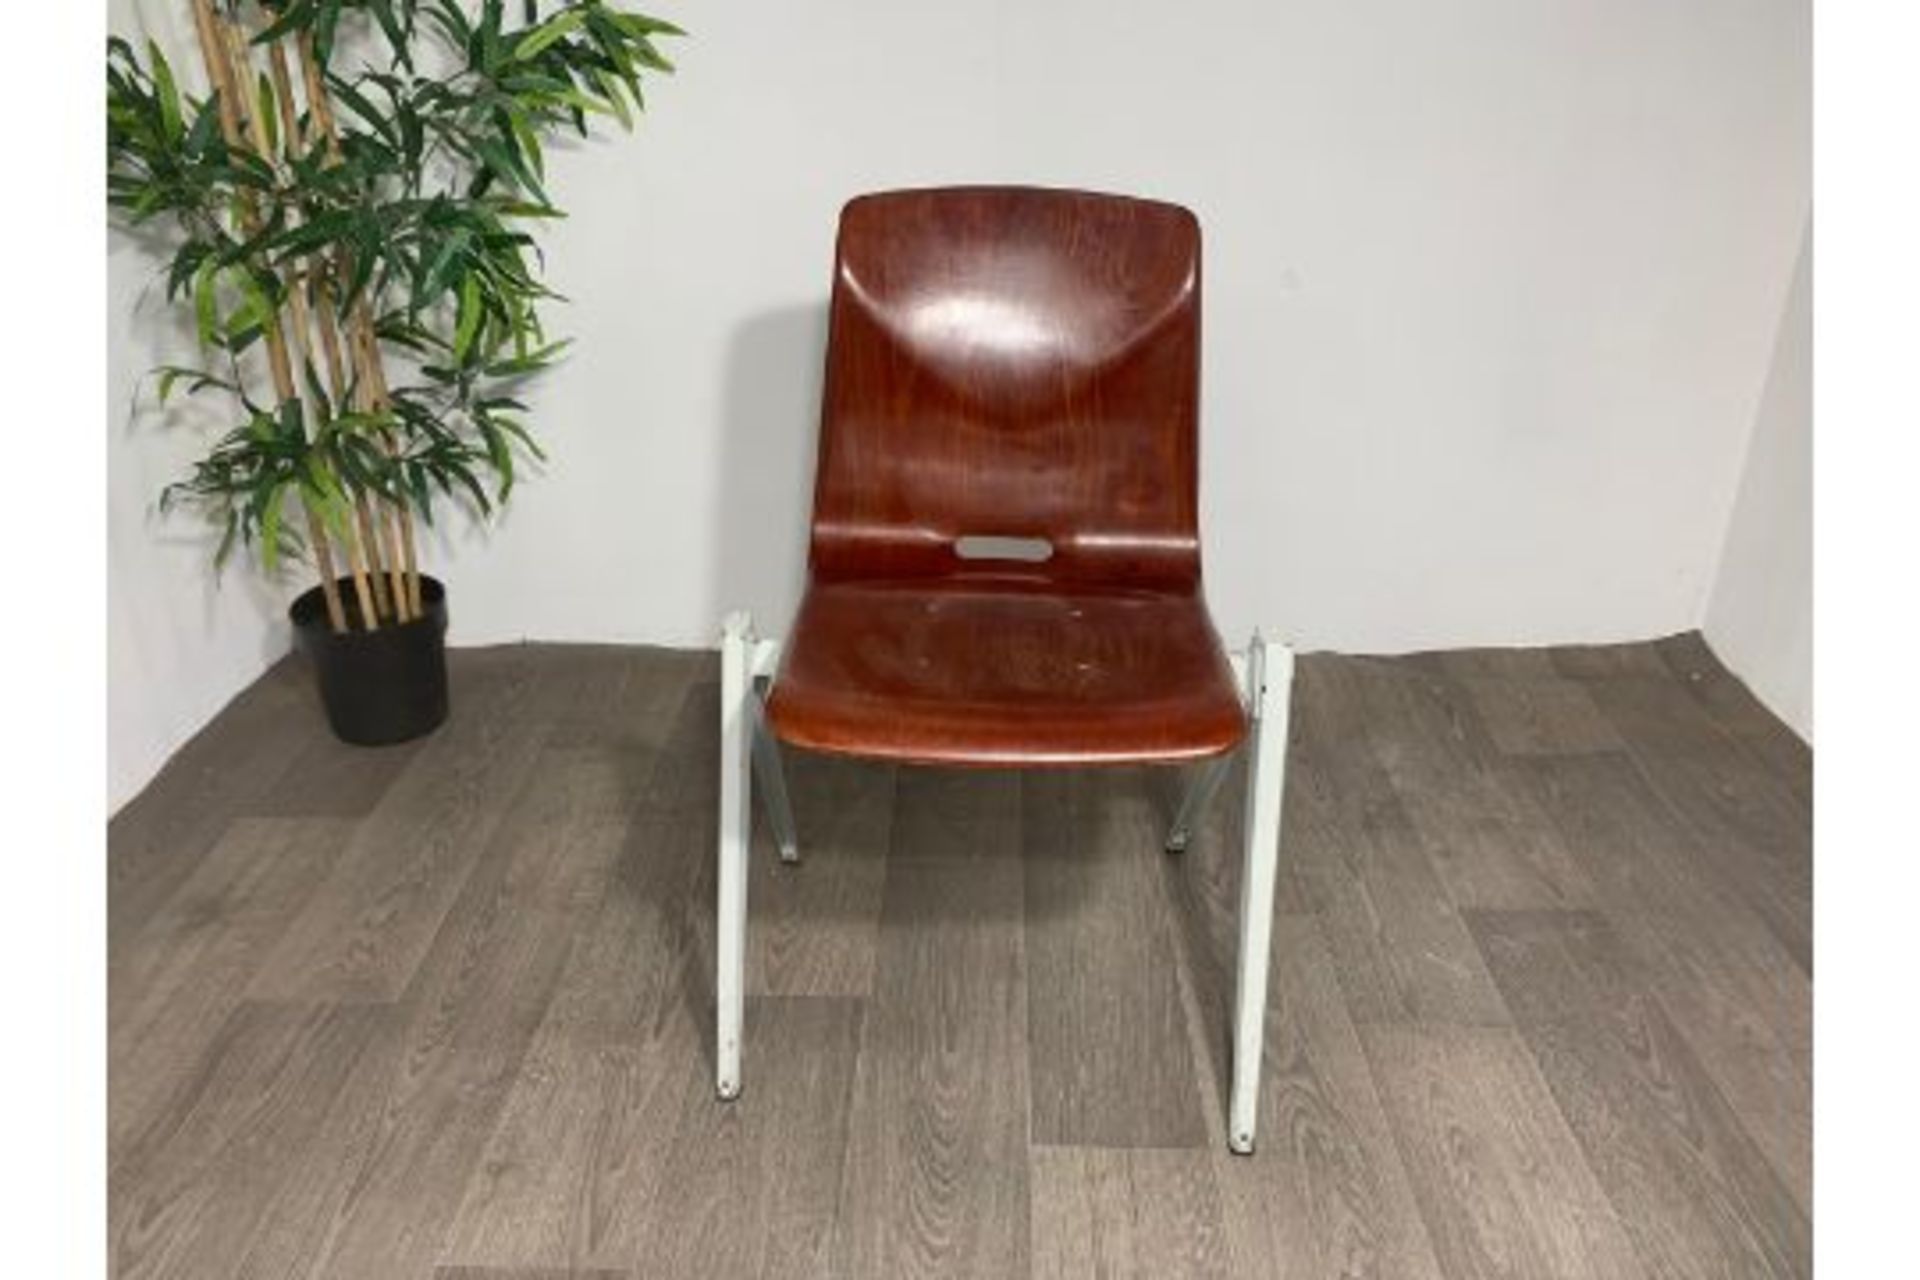 Thur Op Seat Stackable Chair in mahogany resin x2 - Image 3 of 6